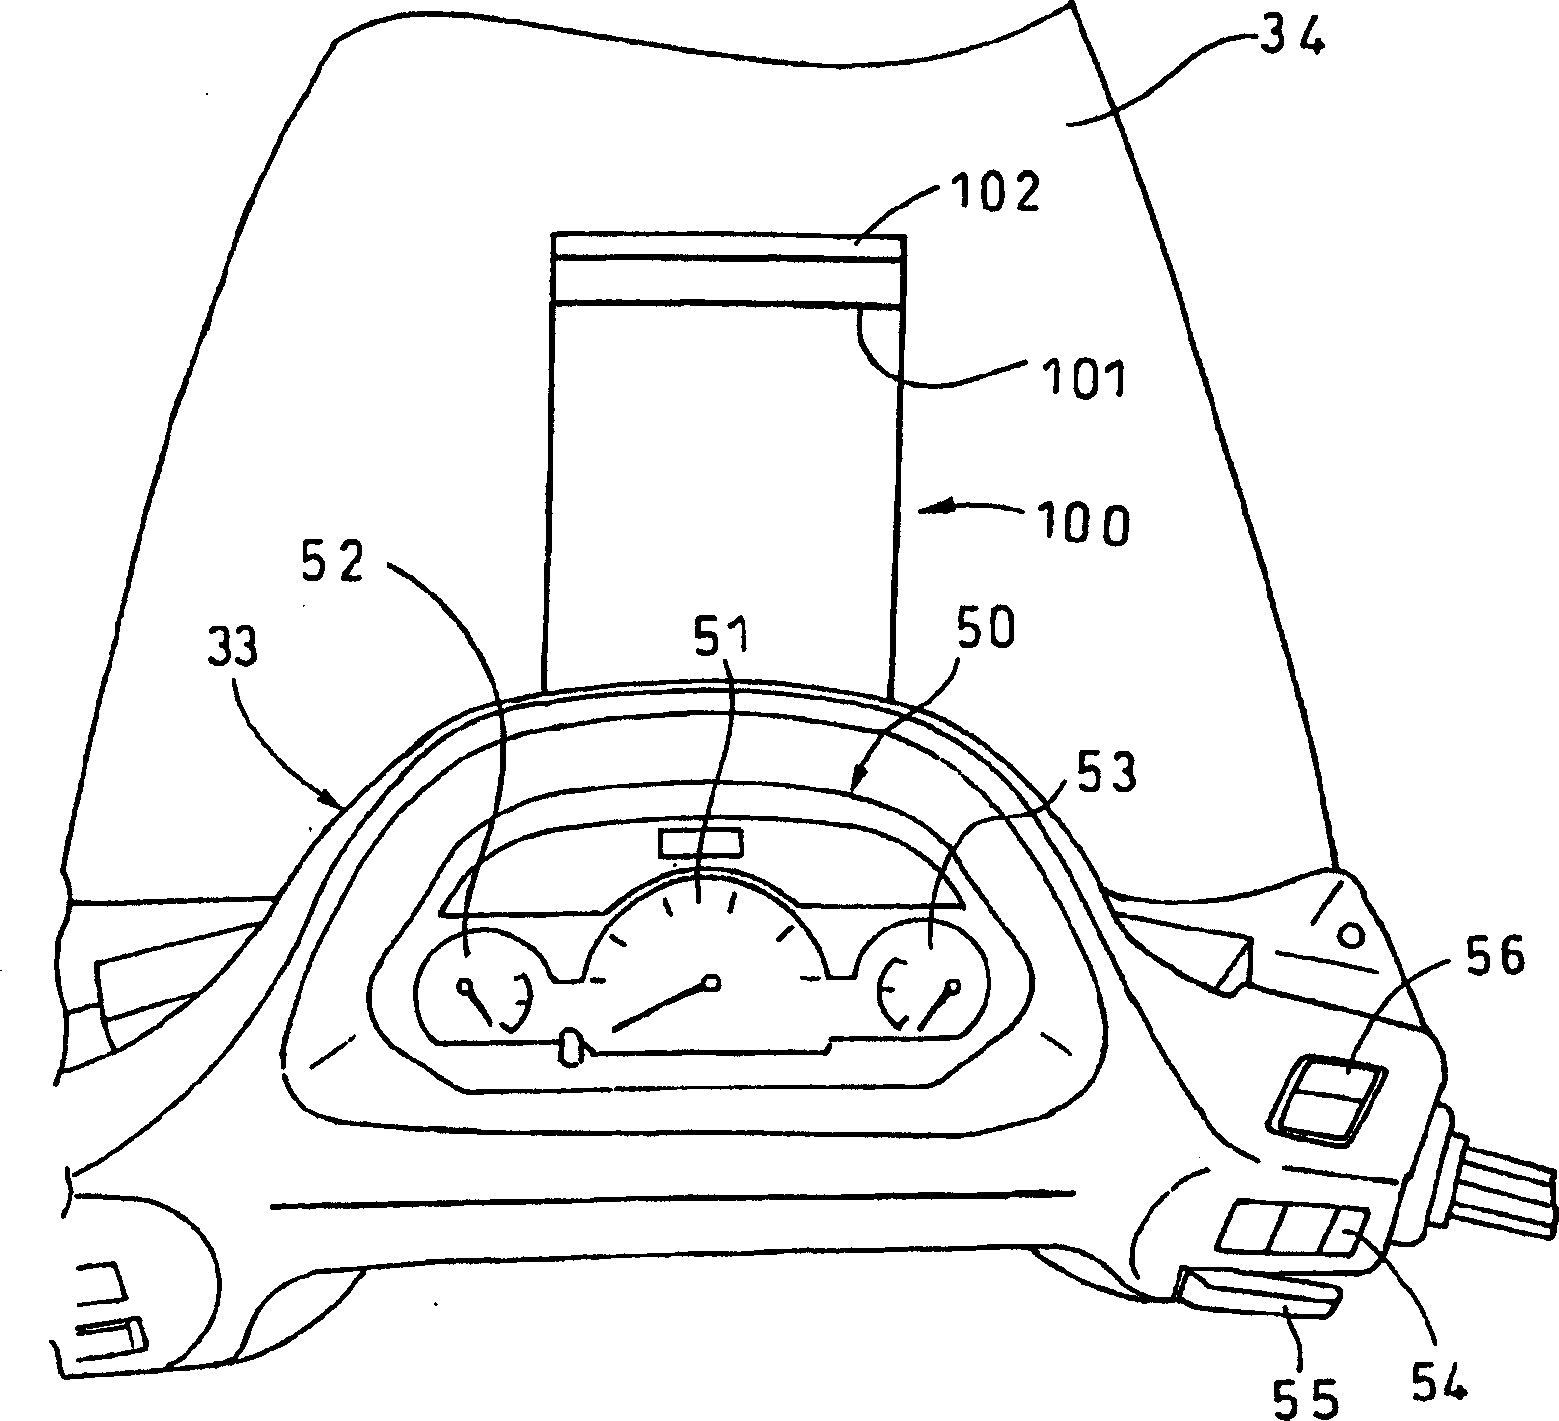 Display device for the vehicle and its ray guiding plate